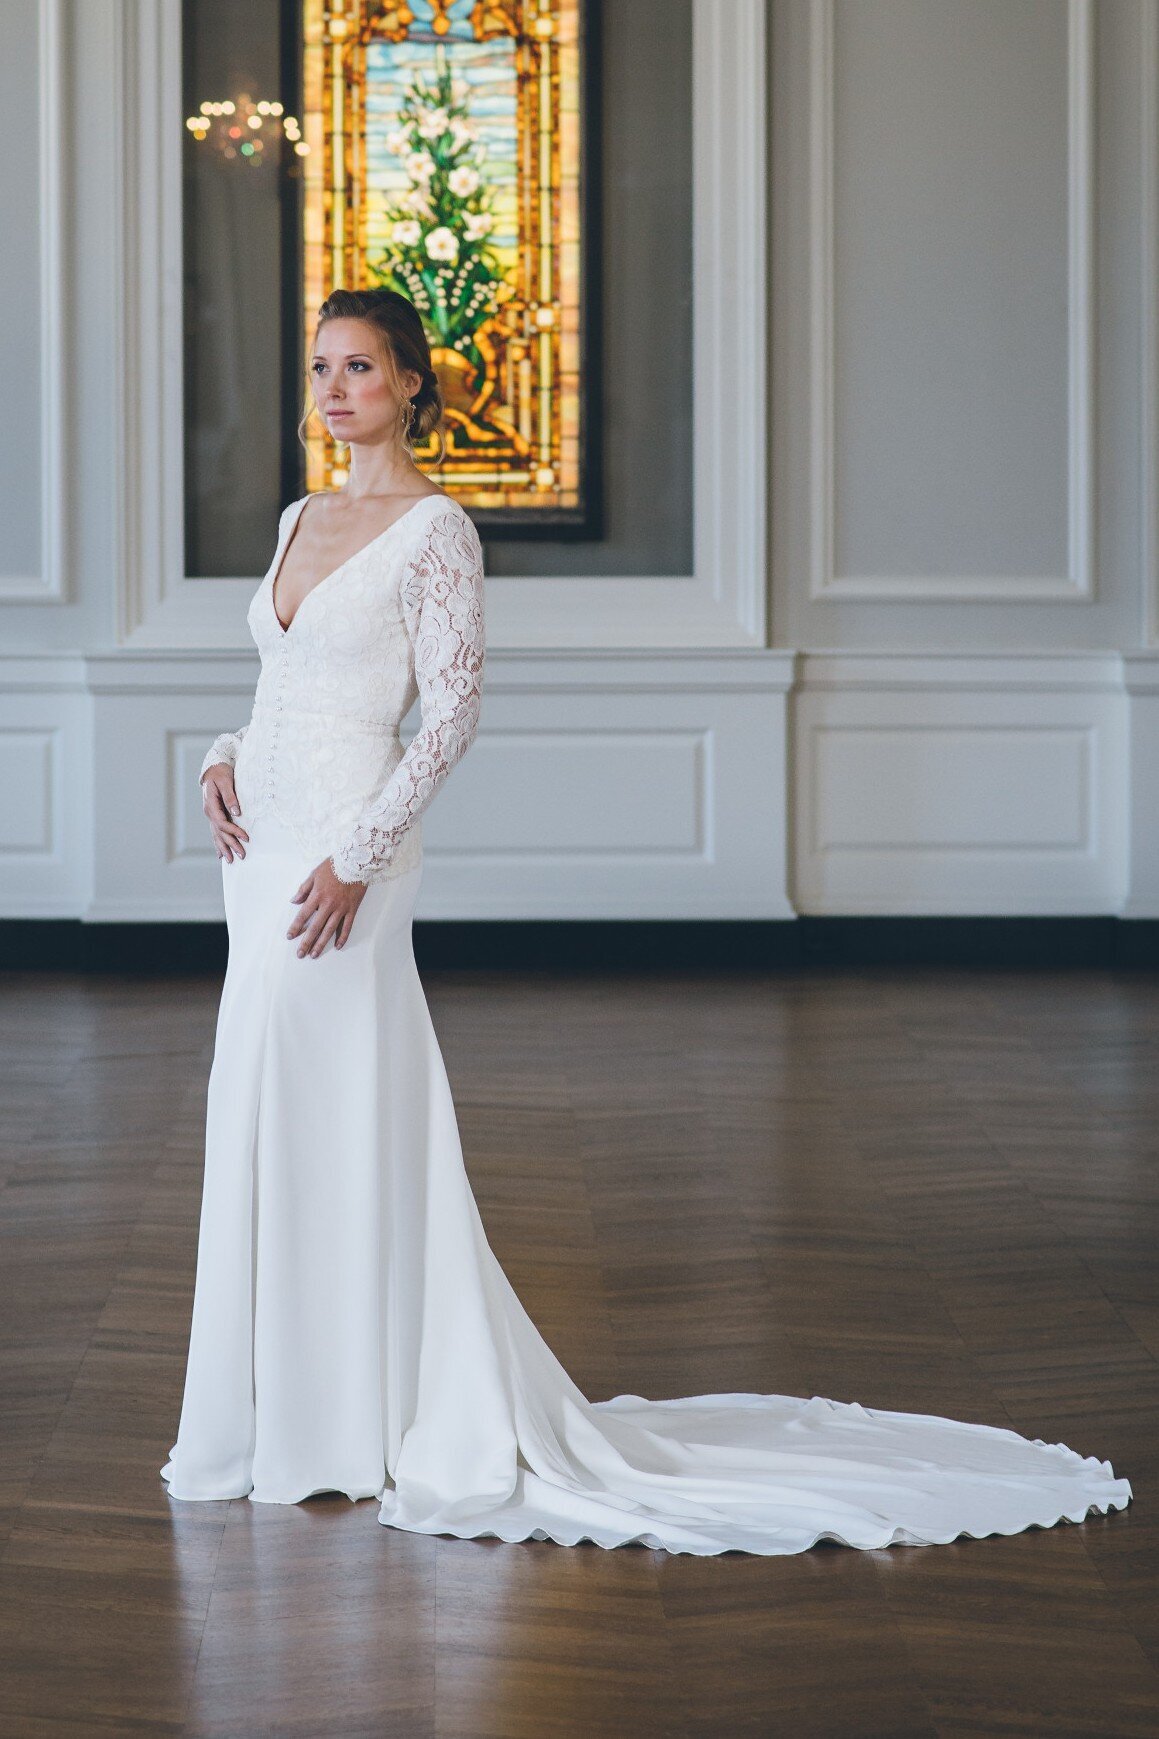 Bibi is a crepe and lace wedding dress in a fit-and-flare silhouette with a v-neck, long sleeves, and long train.